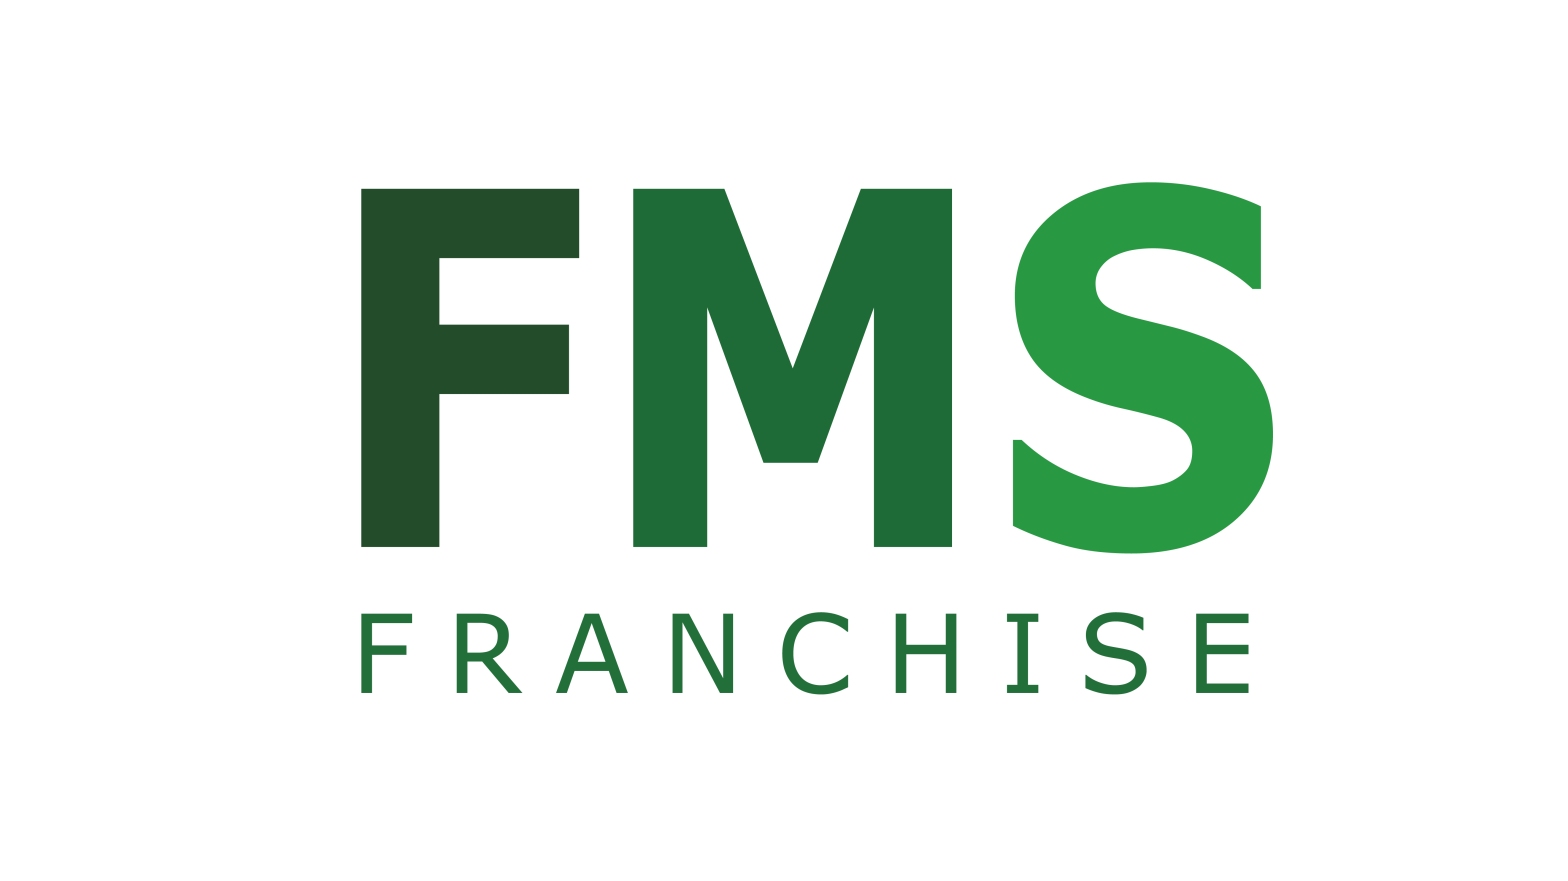 Franchise Marketing Systems Reviews